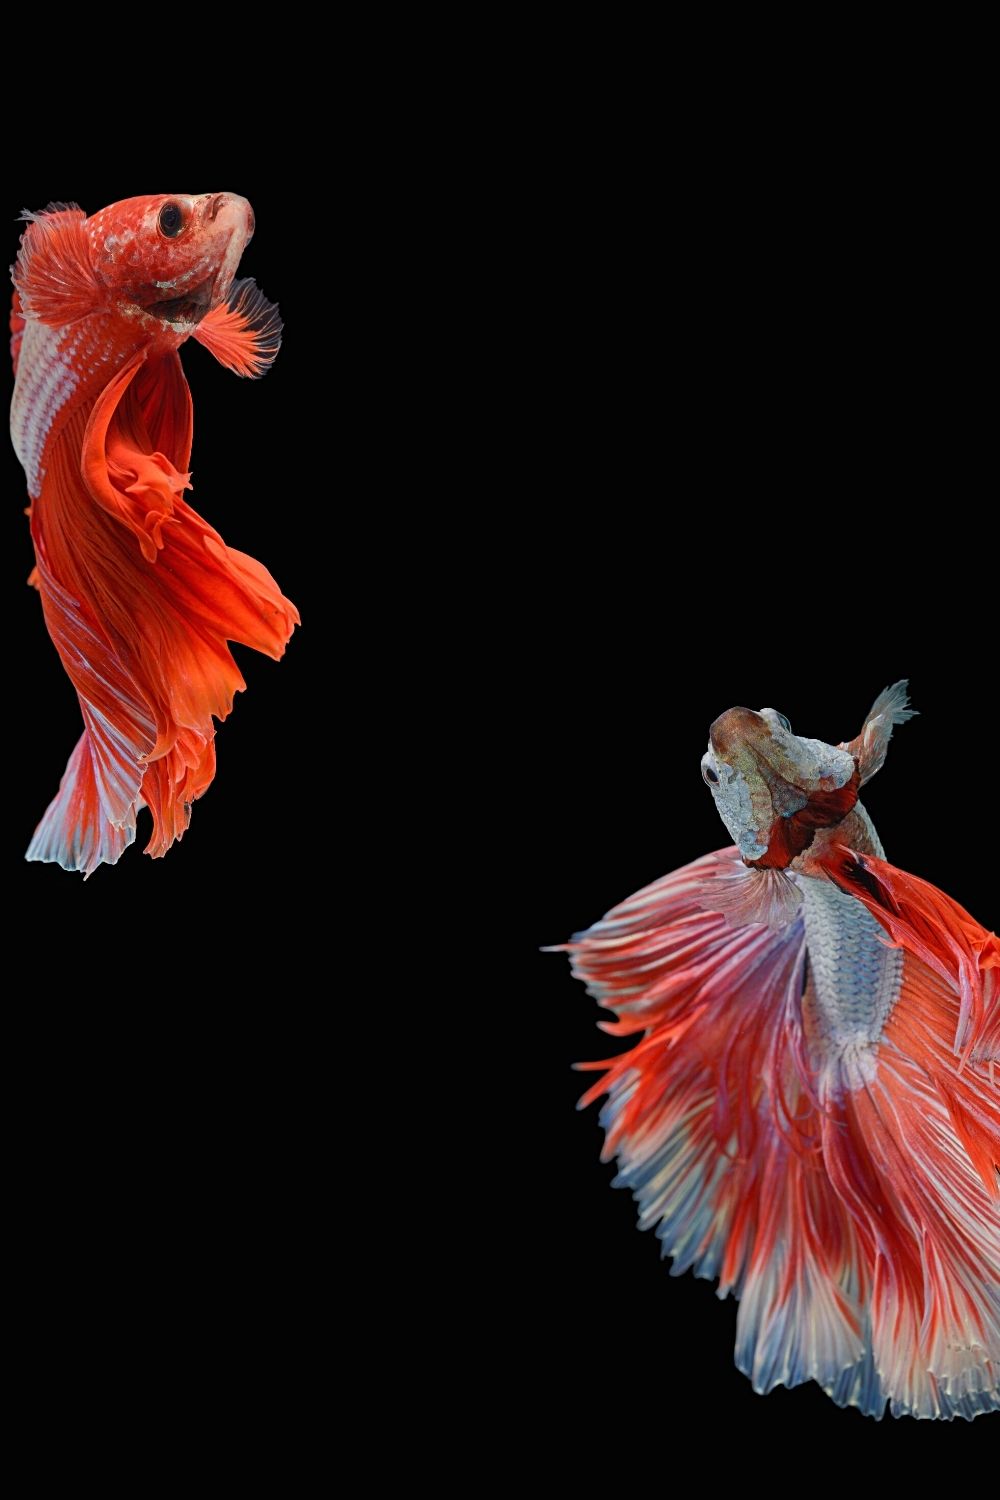 You can place male and female Betta fish together in an aquarium only when breeding them